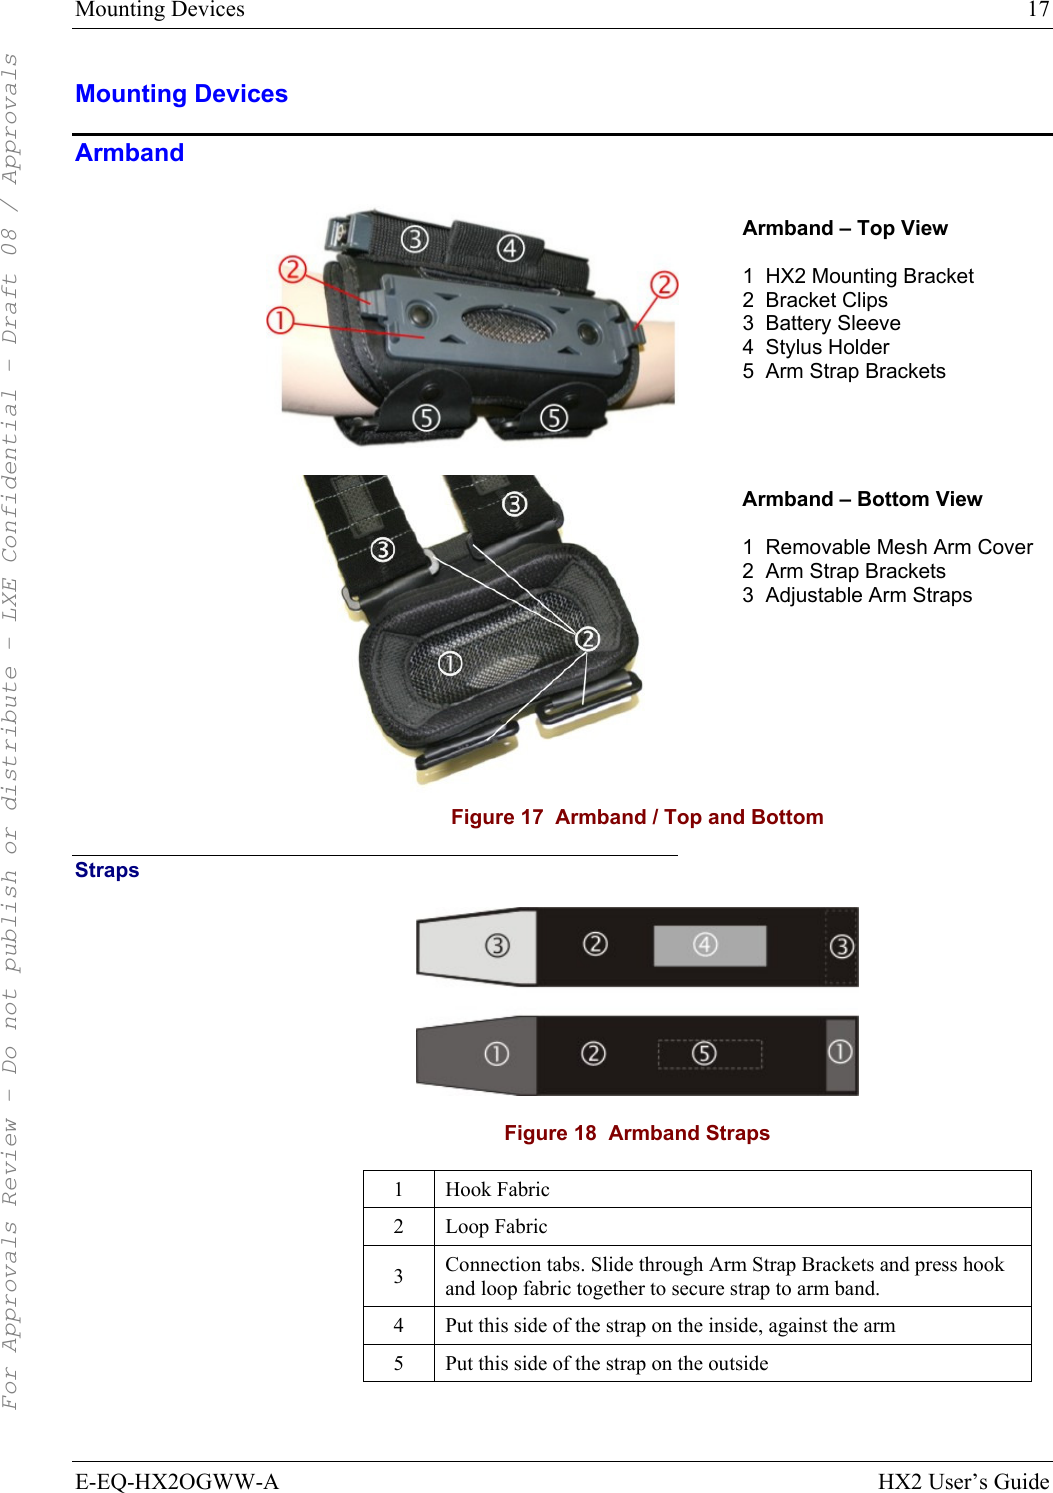 Mounting Devices  17 E-EQ-HX2OGWW-A HX2 User’s Guide Mounting Devices Armband   Armband – Top View  1  HX2 Mounting Bracket 2  Bracket Clips 3  Battery Sleeve 4  Stylus Holder 5  Arm Strap Brackets   Armband – Bottom View  1  Removable Mesh Arm Cover 2  Arm Strap Brackets 3  Adjustable Arm Straps  Figure 17  Armband / Top and Bottom Straps  Figure 18  Armband Straps 1 Hook Fabric 2 Loop Fabric 3  Connection tabs. Slide through Arm Strap Brackets and press hook and loop fabric together to secure strap to arm band.  4  Put this side of the strap on the inside, against the arm 5  Put this side of the strap on the outside  For Approvals Review - Do not publish or distribute - LXE Confidential - Draft 08 / Approvals